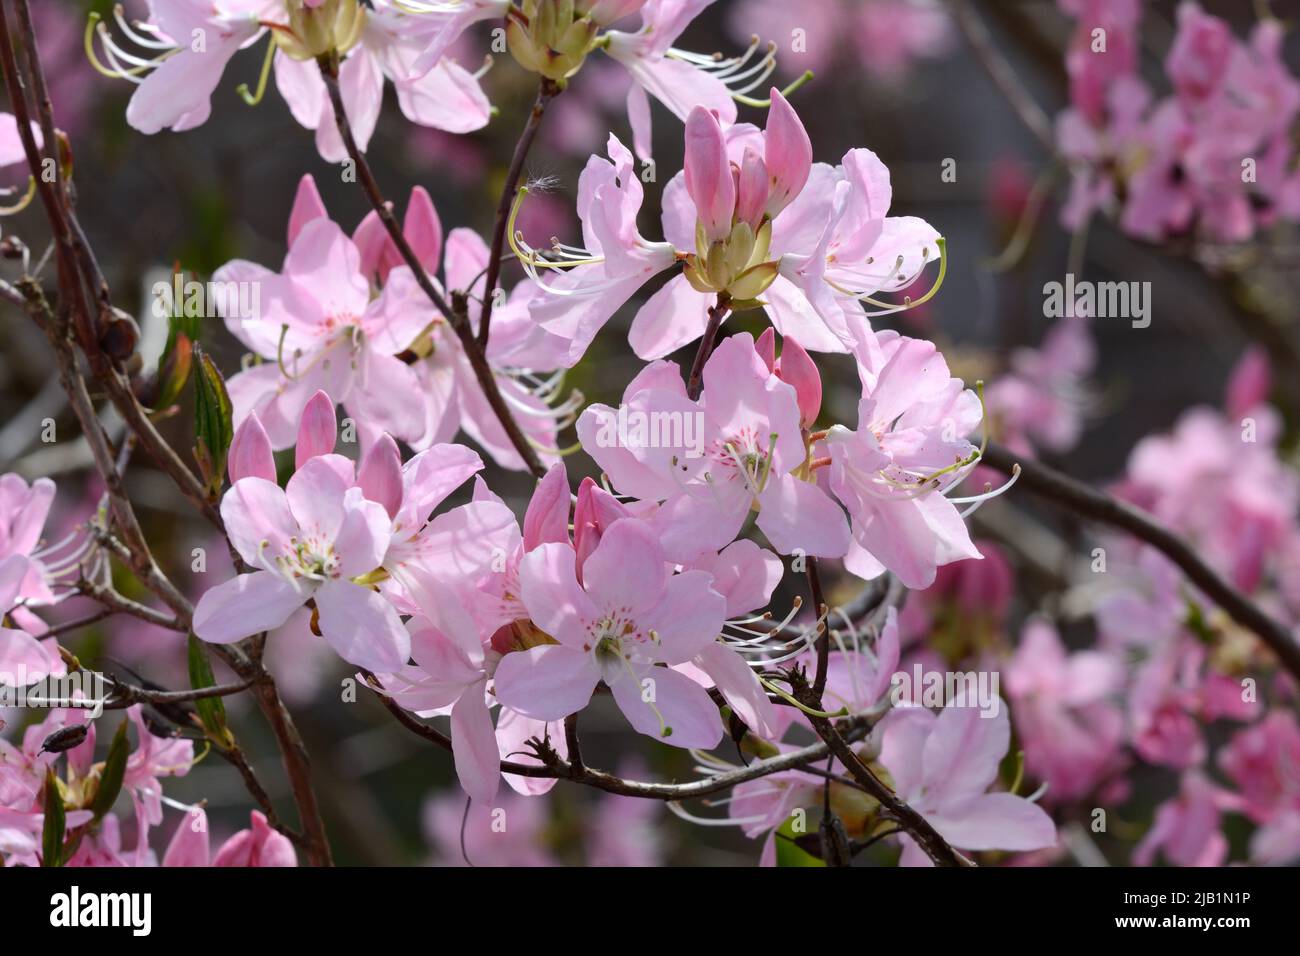 Rhododendron yunnanensis pink flowered flowers bloomsYnnan Rhododendron Stock Photo